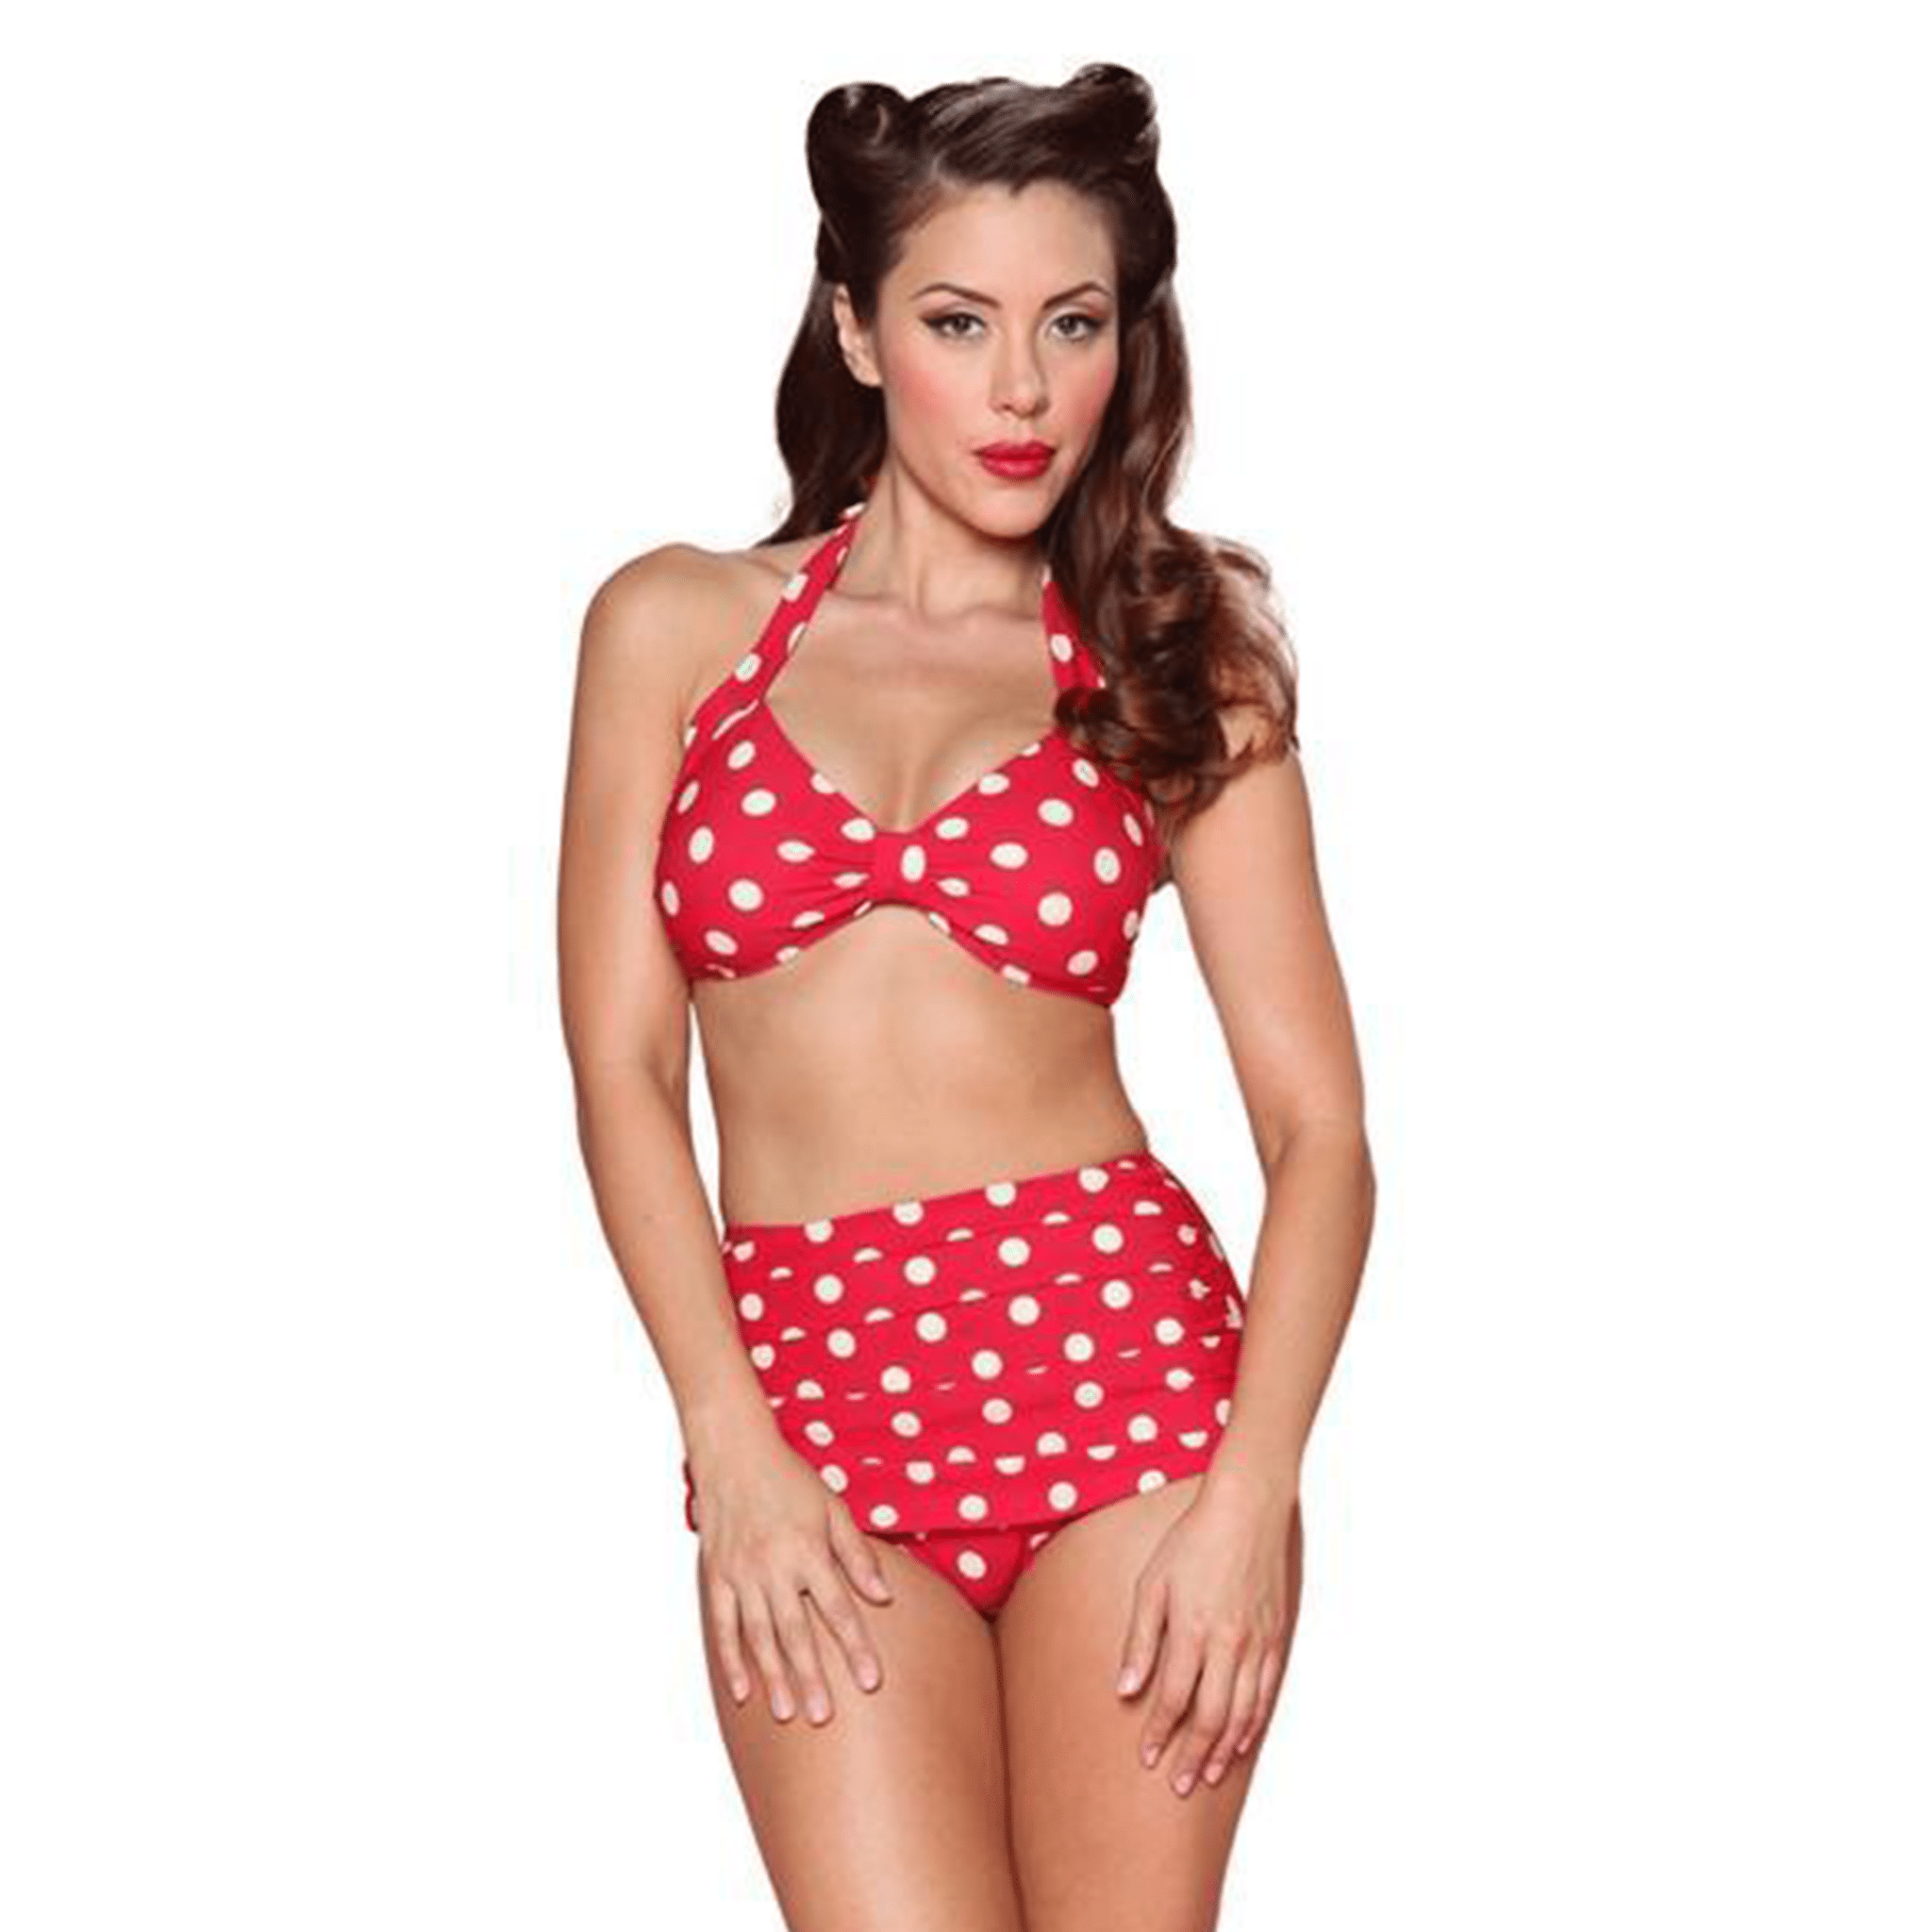 Esther Williams Classic Polka Dot Bathing Suit Top E09006T - Red White - Destination PSP